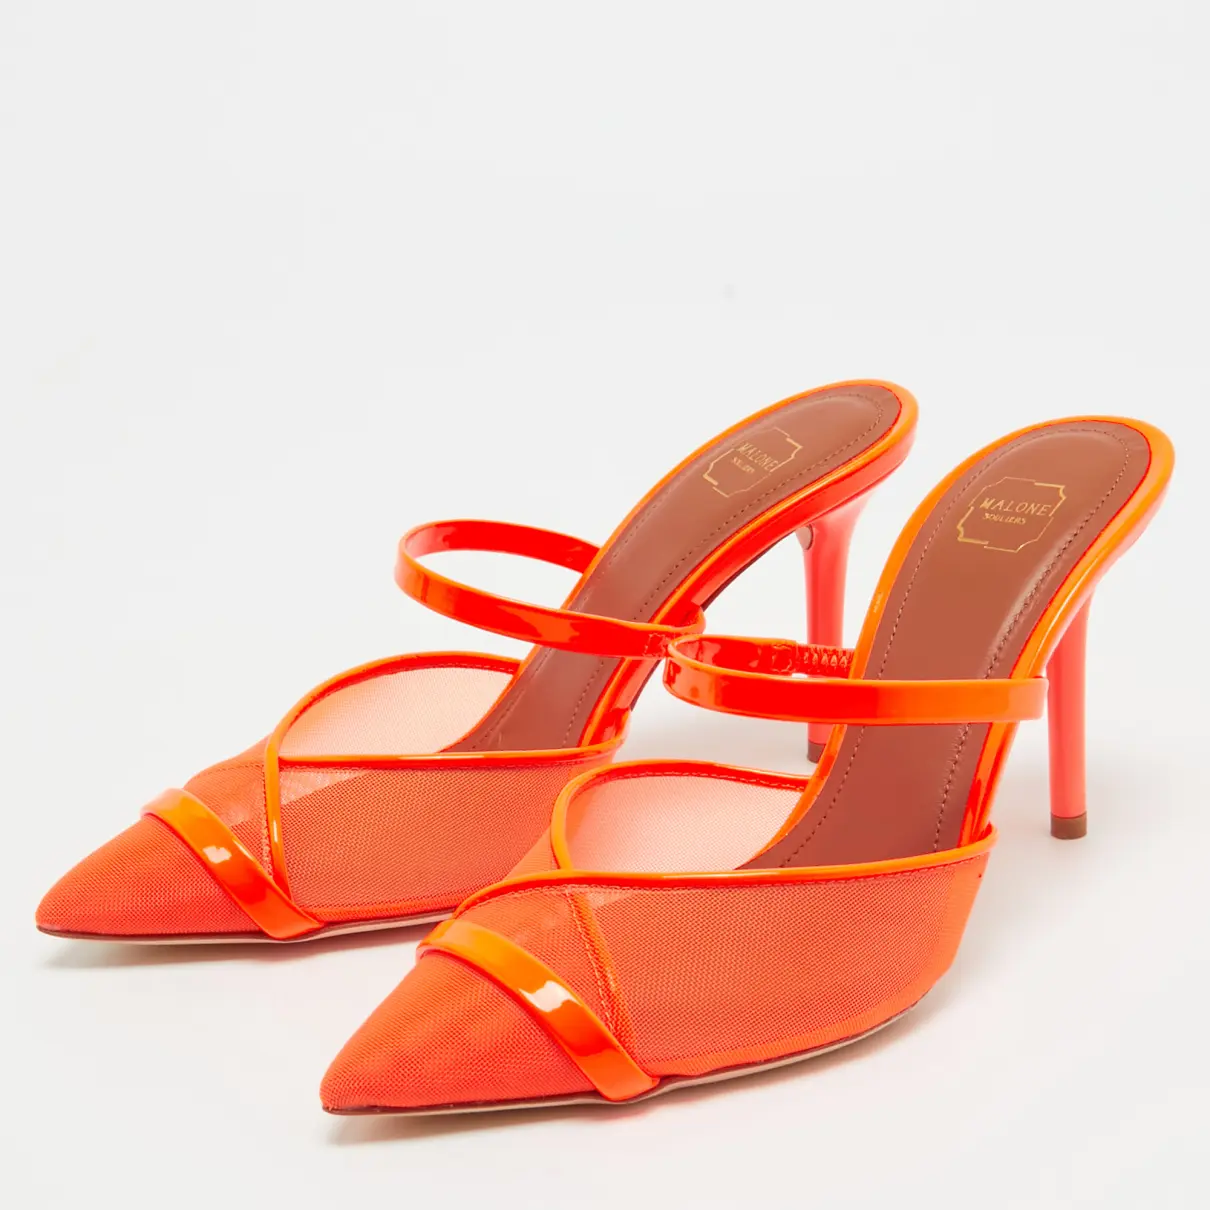 Buy Malone Souliers Patent leather sandal online